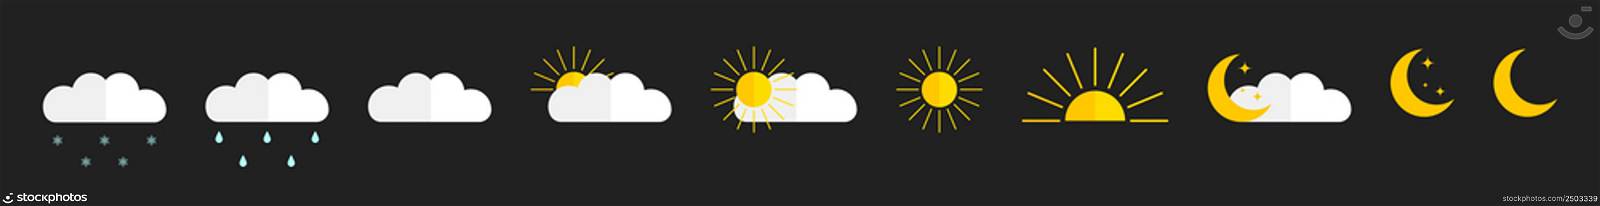 Weather forecast icons. Weather icons isolated on black background. Climate signs. Meteo symbols. Meteorology set with sun, rain, snow and cloud signs. Vector.